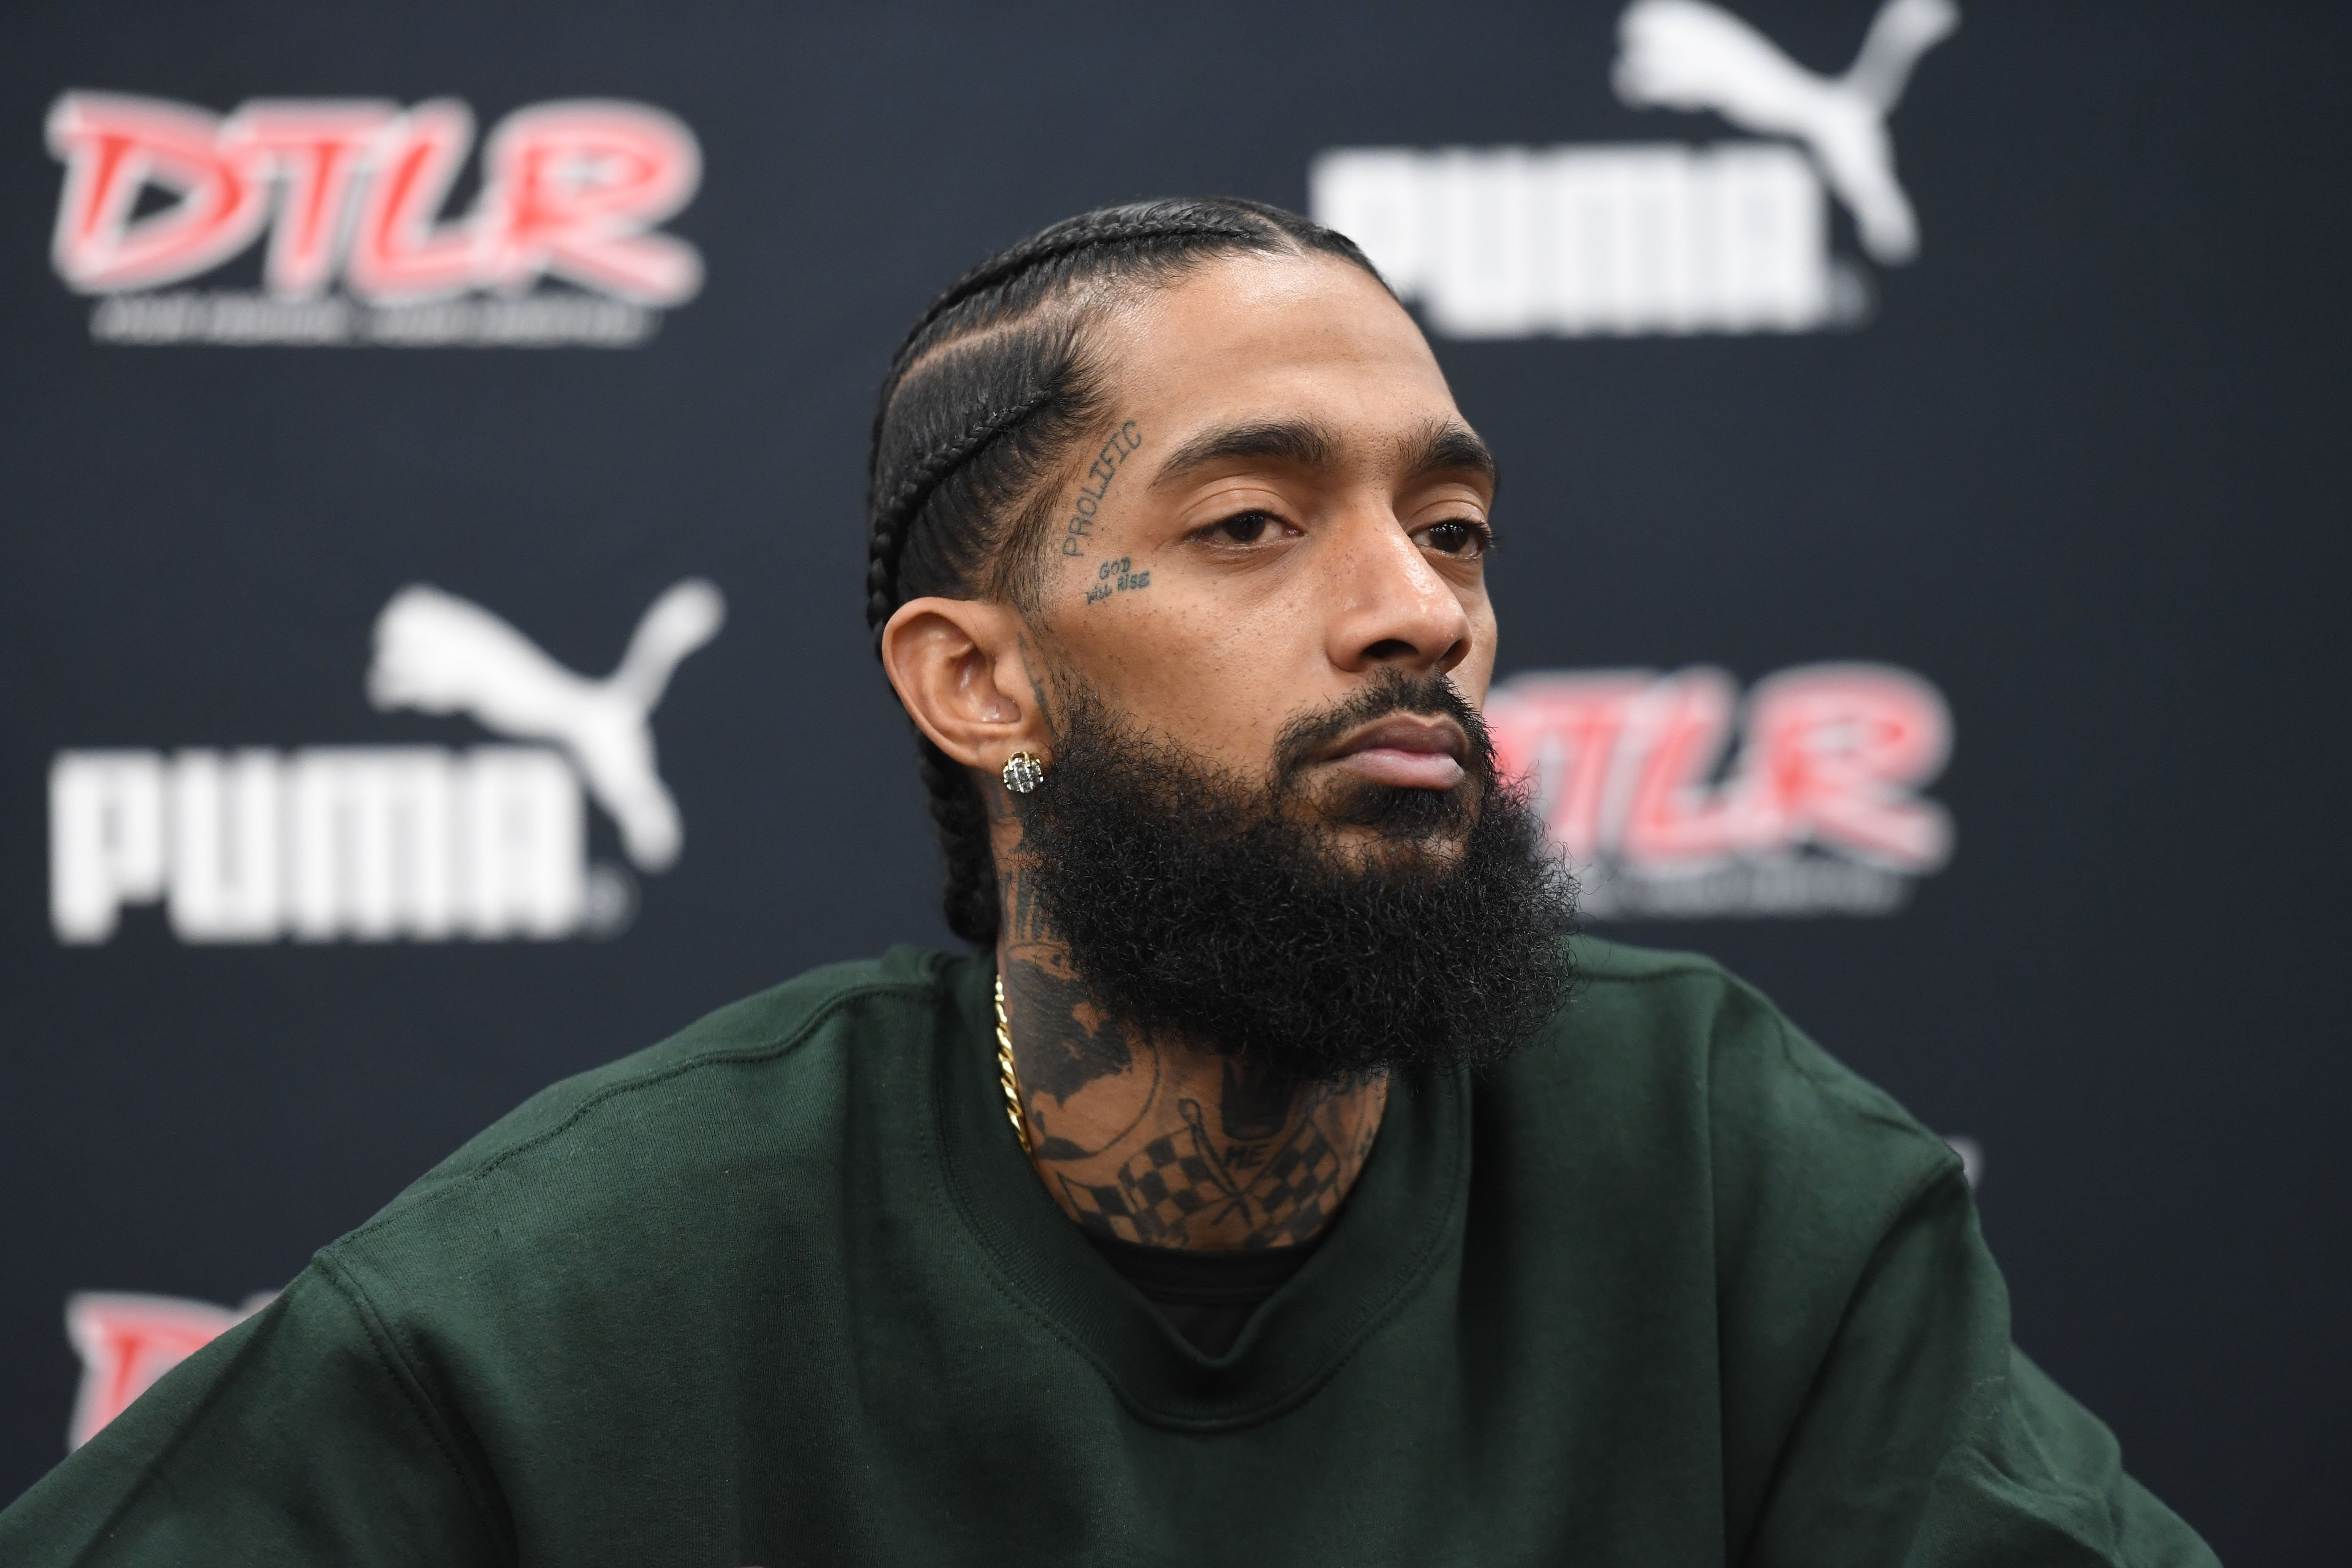 Nipsey Hussle at his "Victory Lap" CD Signing on Feb. 25, 2018 in Georgia | Photo: Getty Images